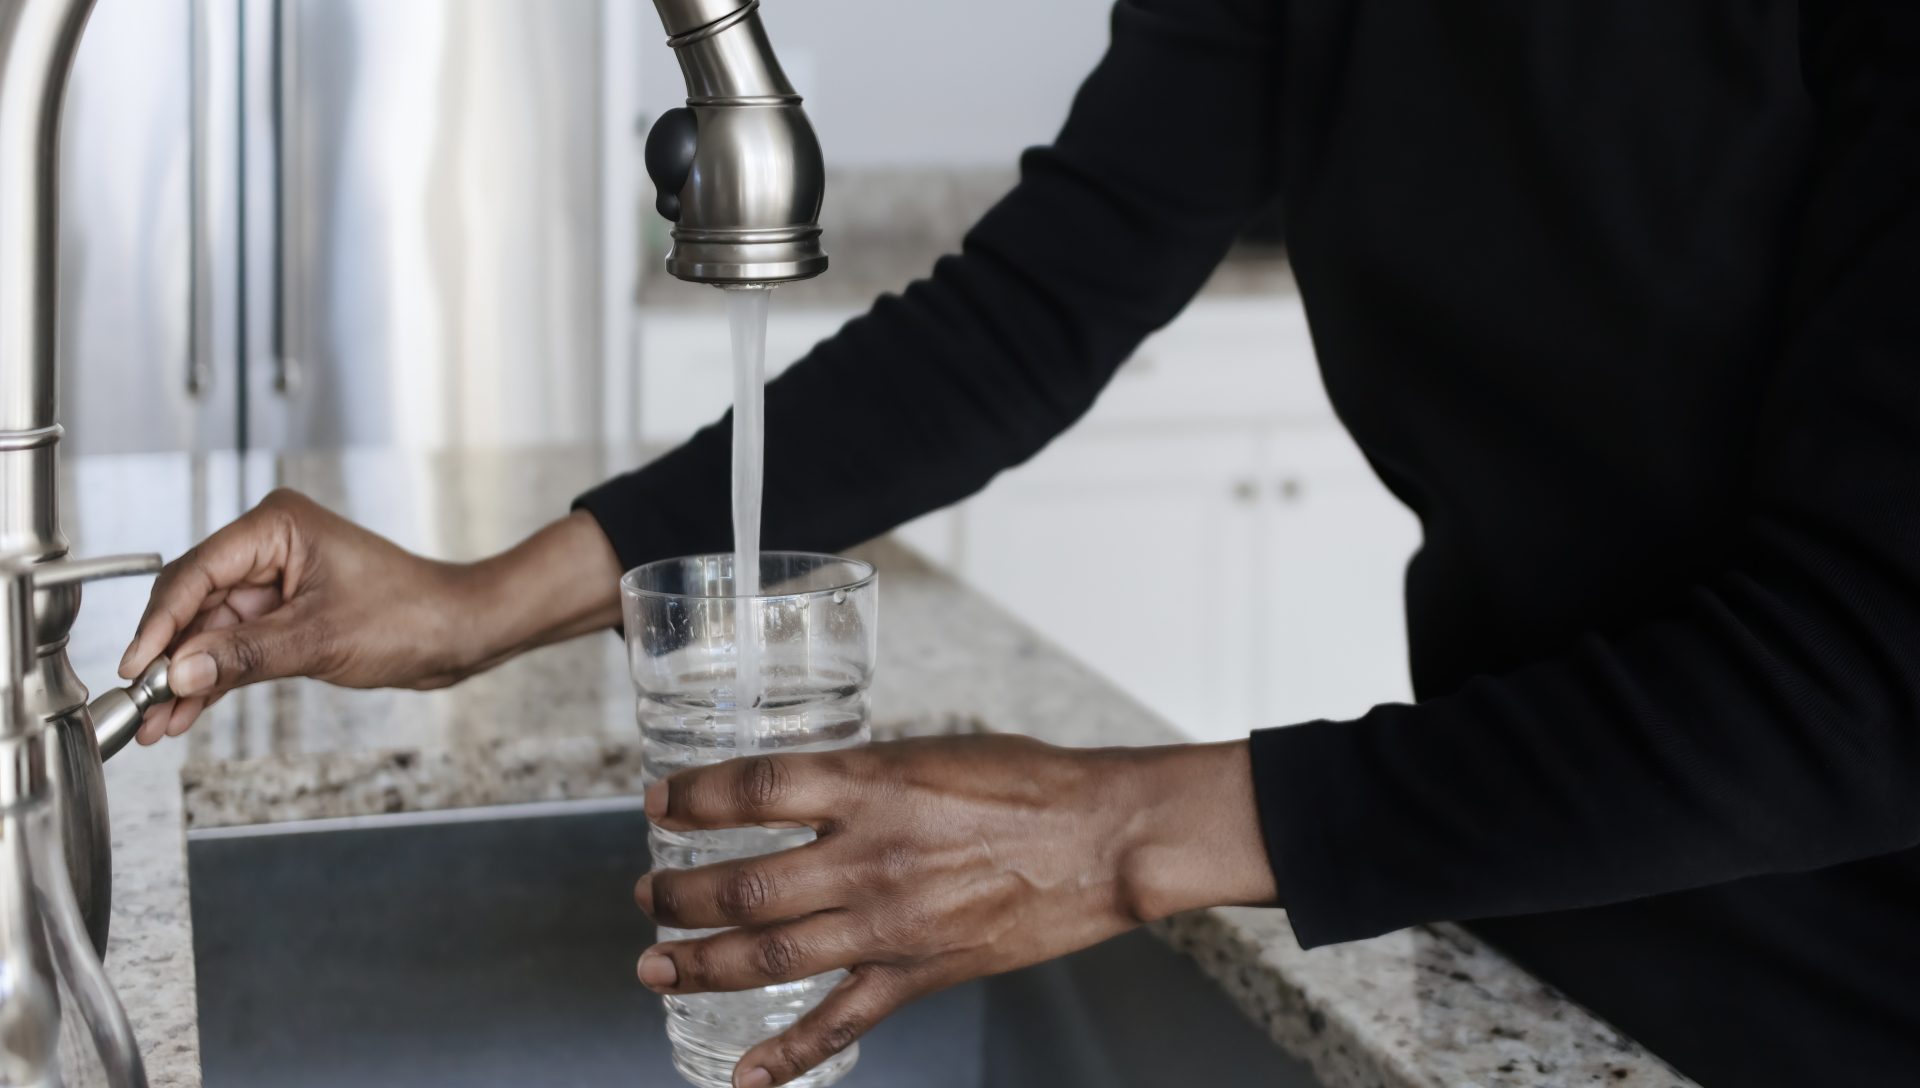 Tap OUT! Federal Study Estimates Tap Water From 45% Of Faucets May Contain 'Forever Chemicals'